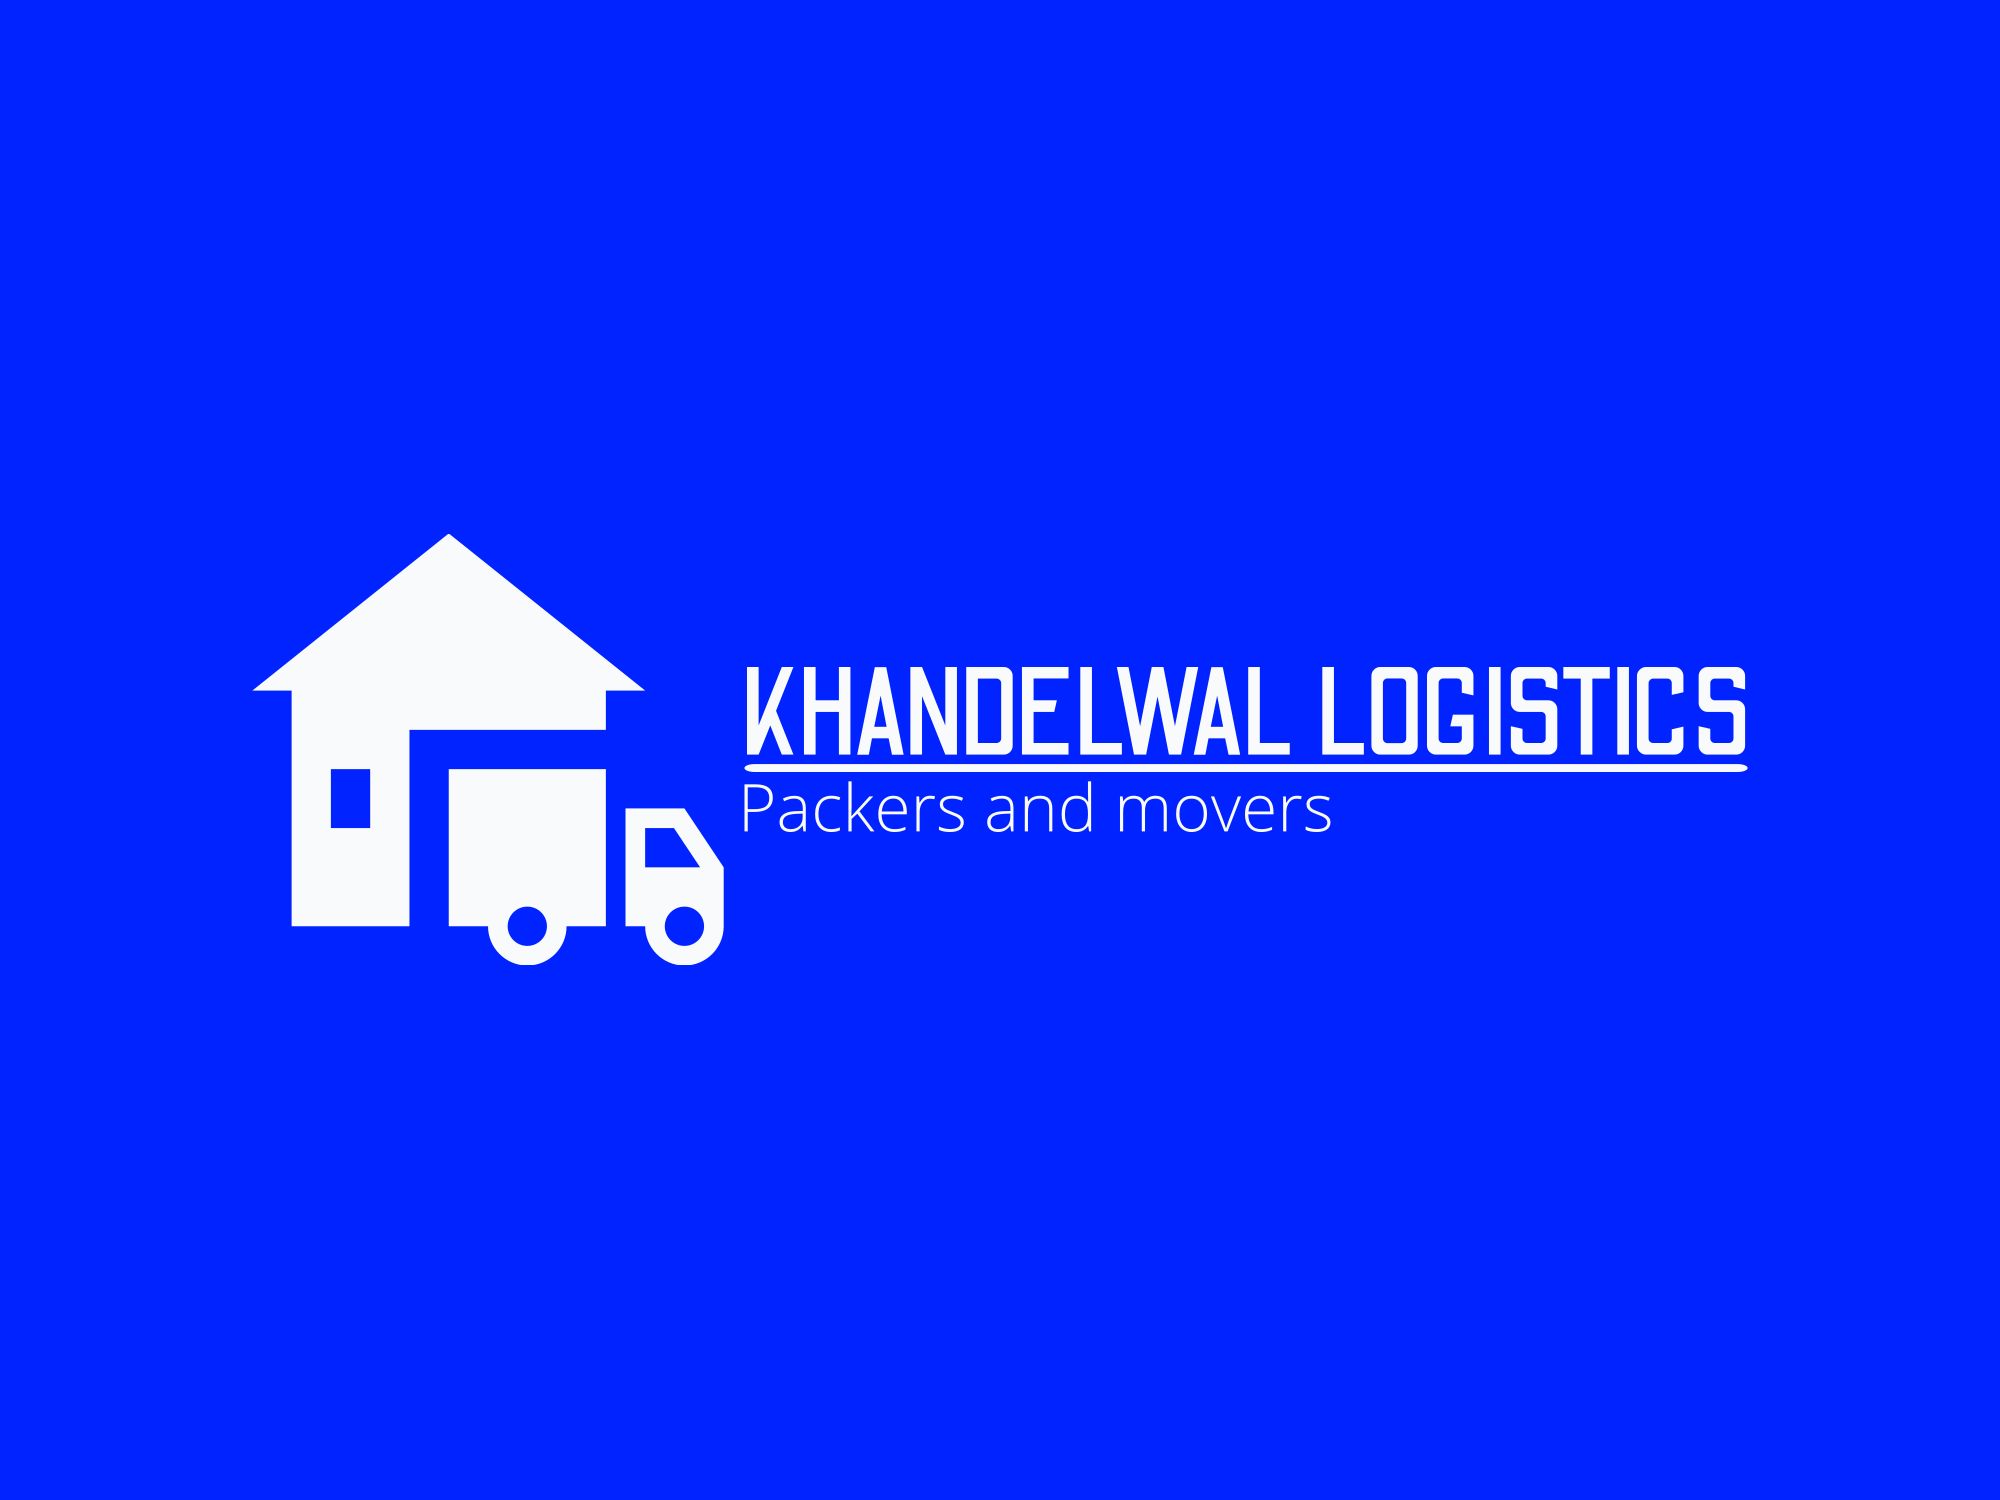 Khandelwal logistics Packers and movers in ahamdabad